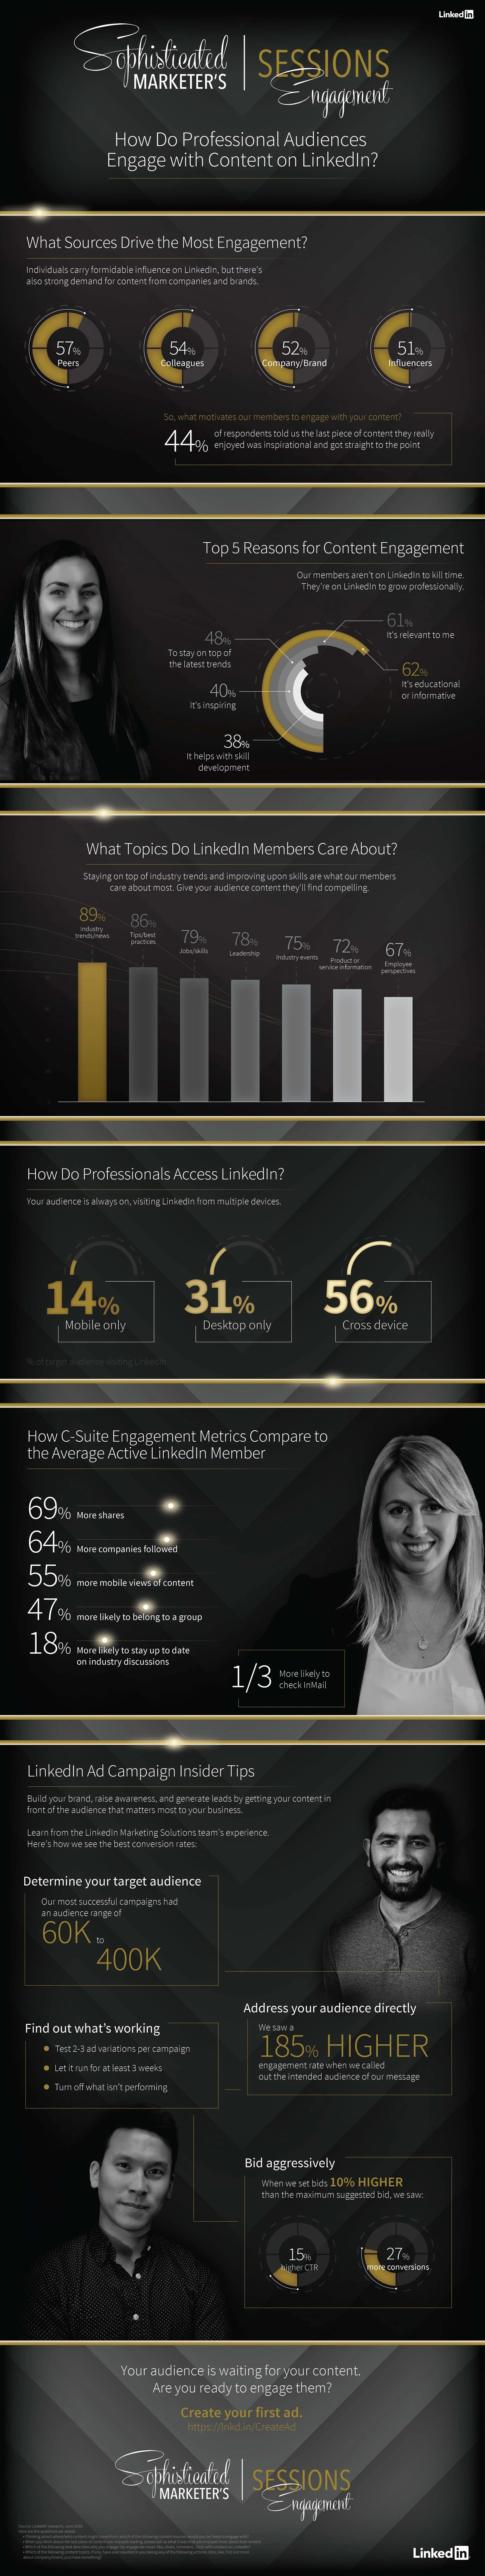 How Do Professional Audiences Engage with Content on LinkedIn? - #Infographic